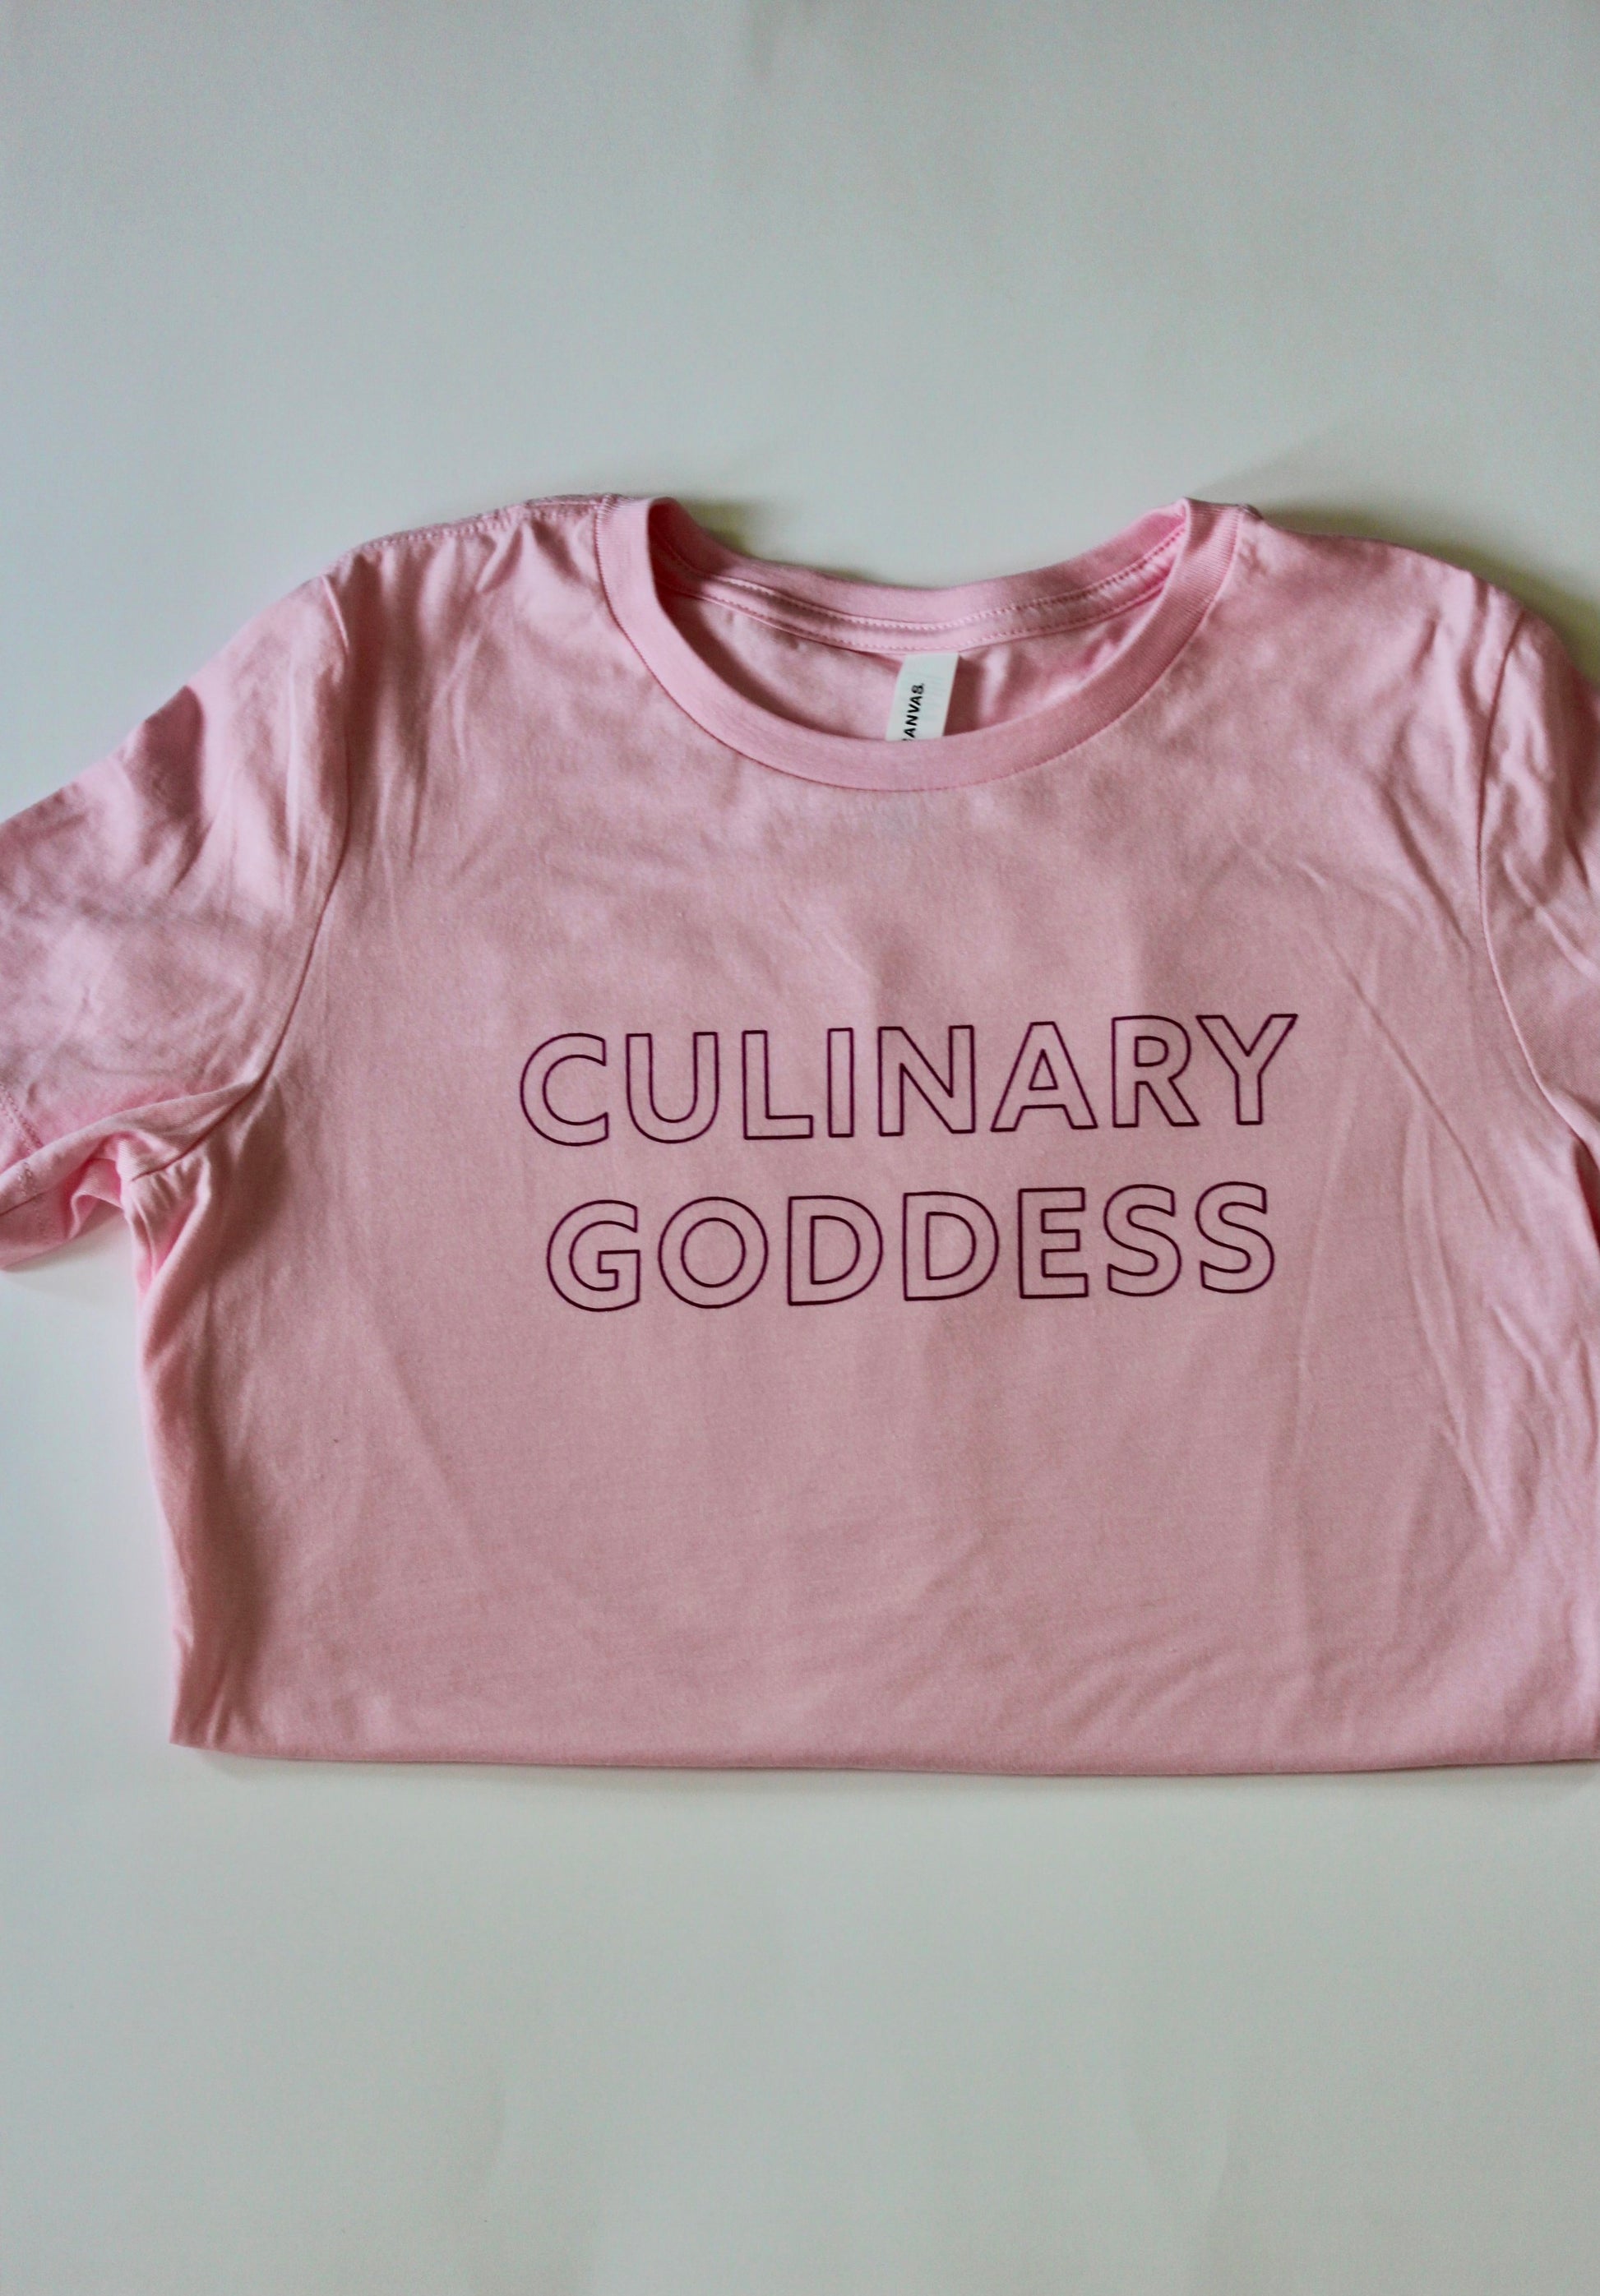 Pink tee with raspberry block letters that read "Culinary Goddess"